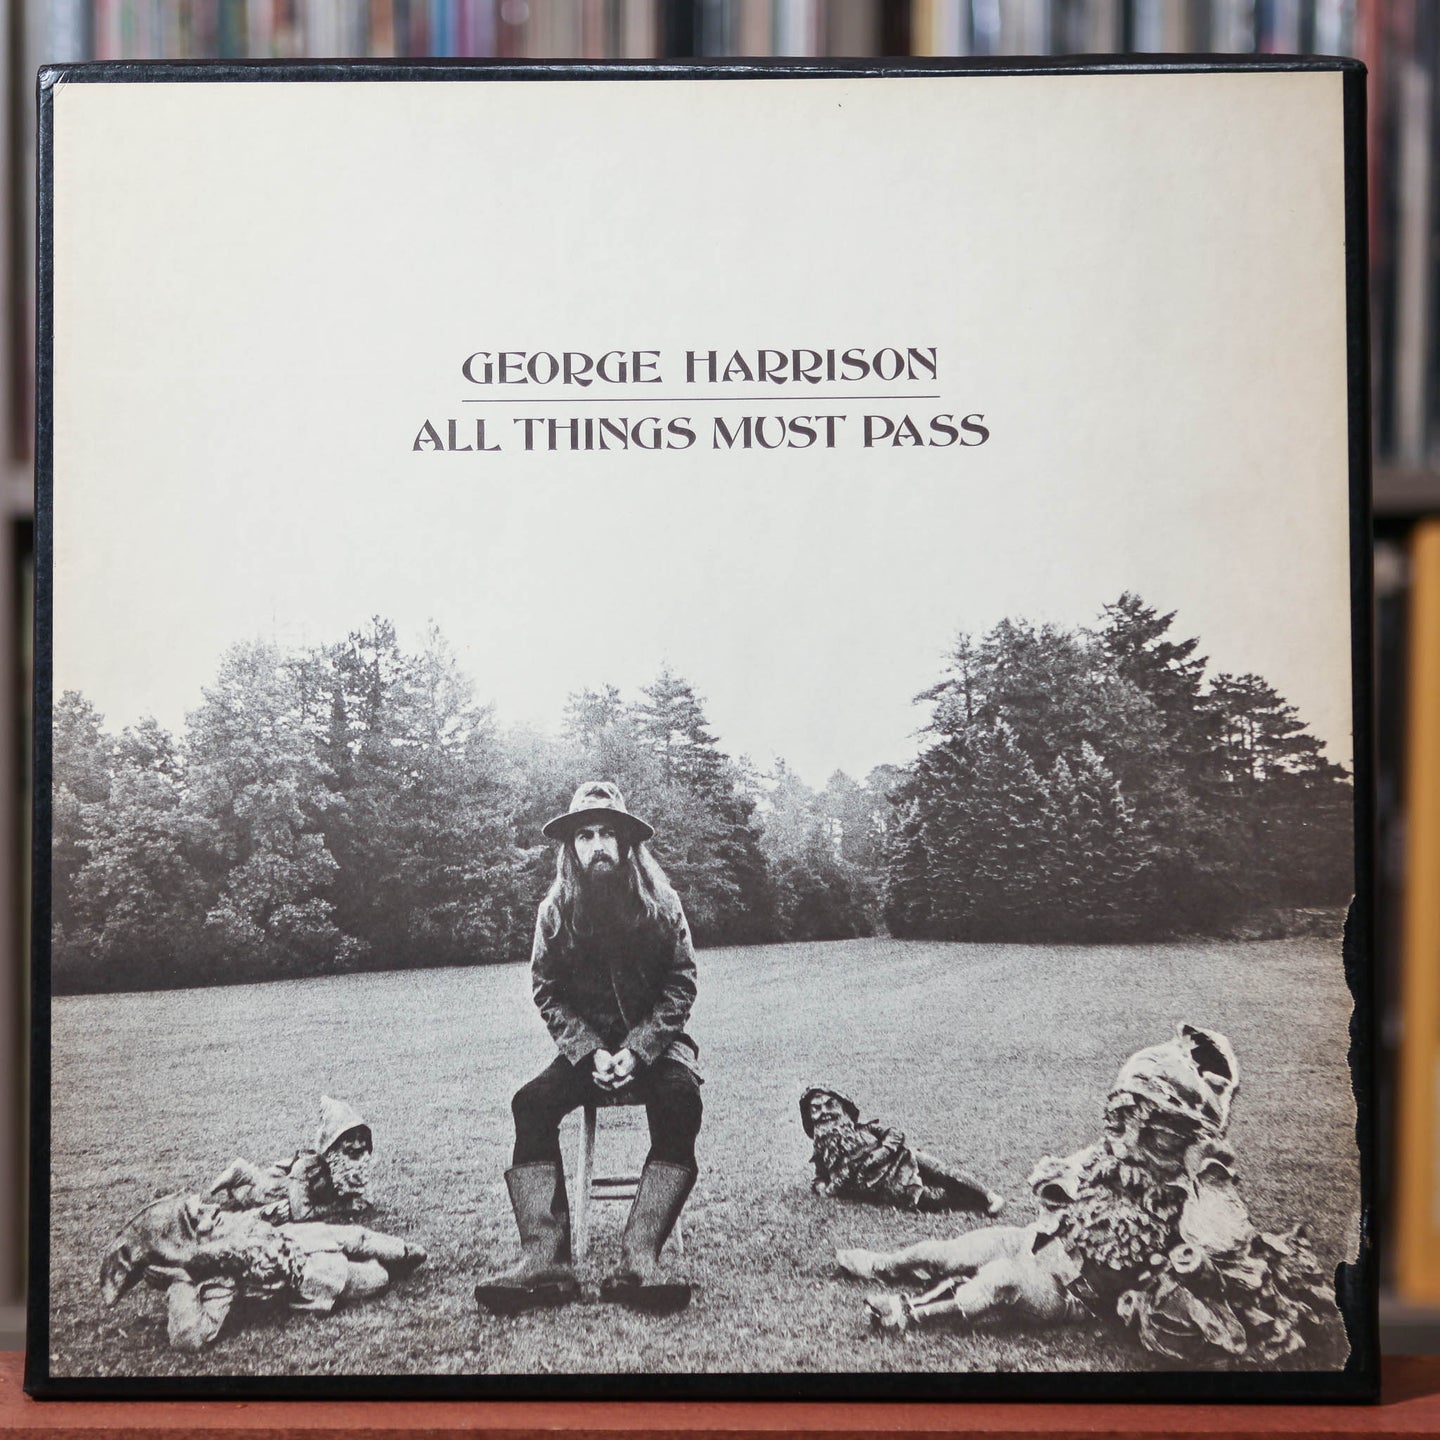 George Harrison - All Things Must Pass - 3LP - 1970 Apple, VG+/VG+